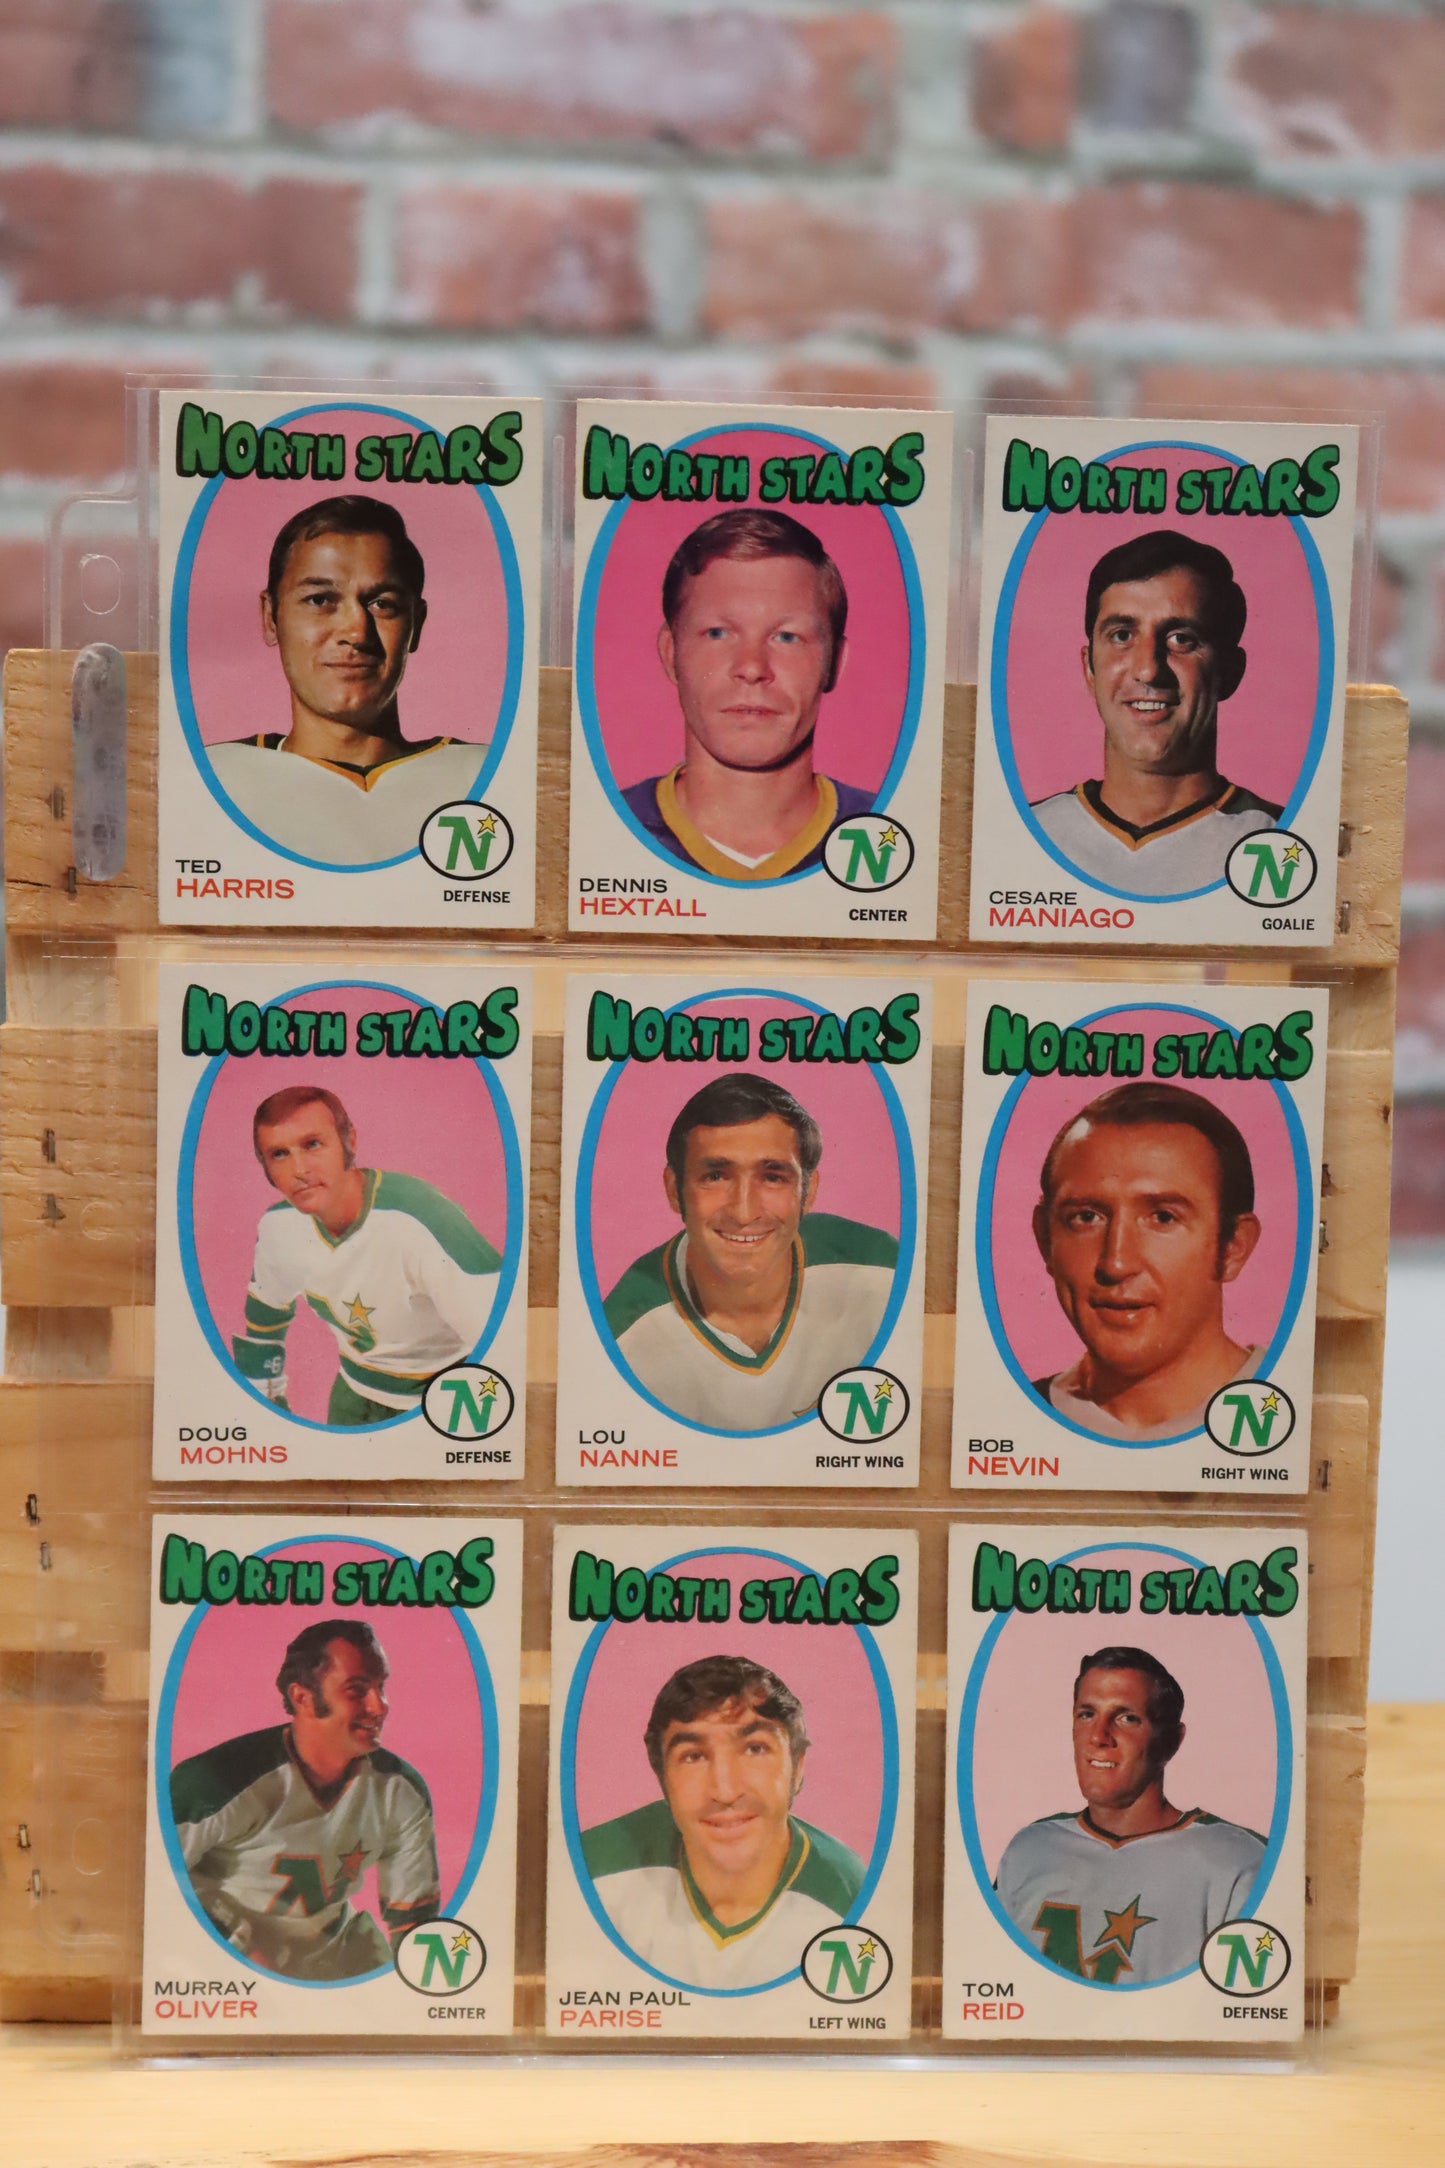 1971/72 O-Pee-Chee Complete Hockey Card Set - Excellent Condition